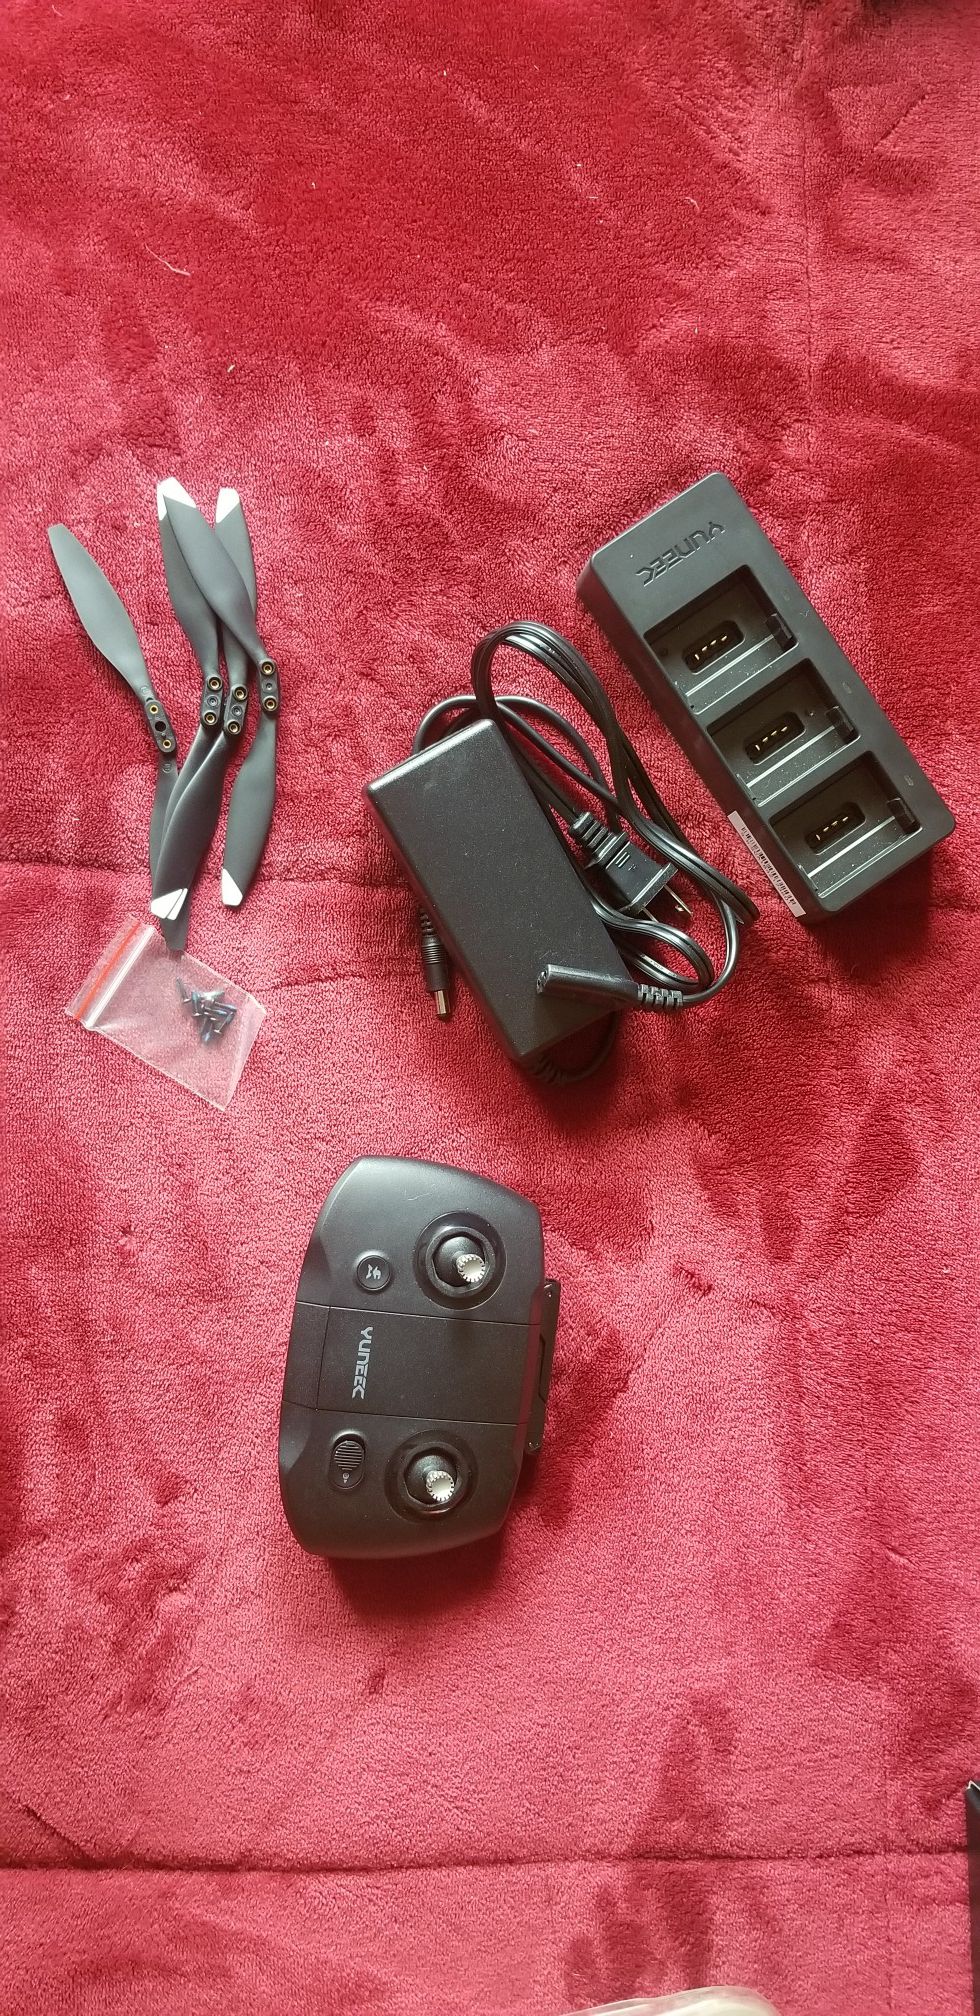 Yuneec Mantis Q Controller, Blades, and Charger